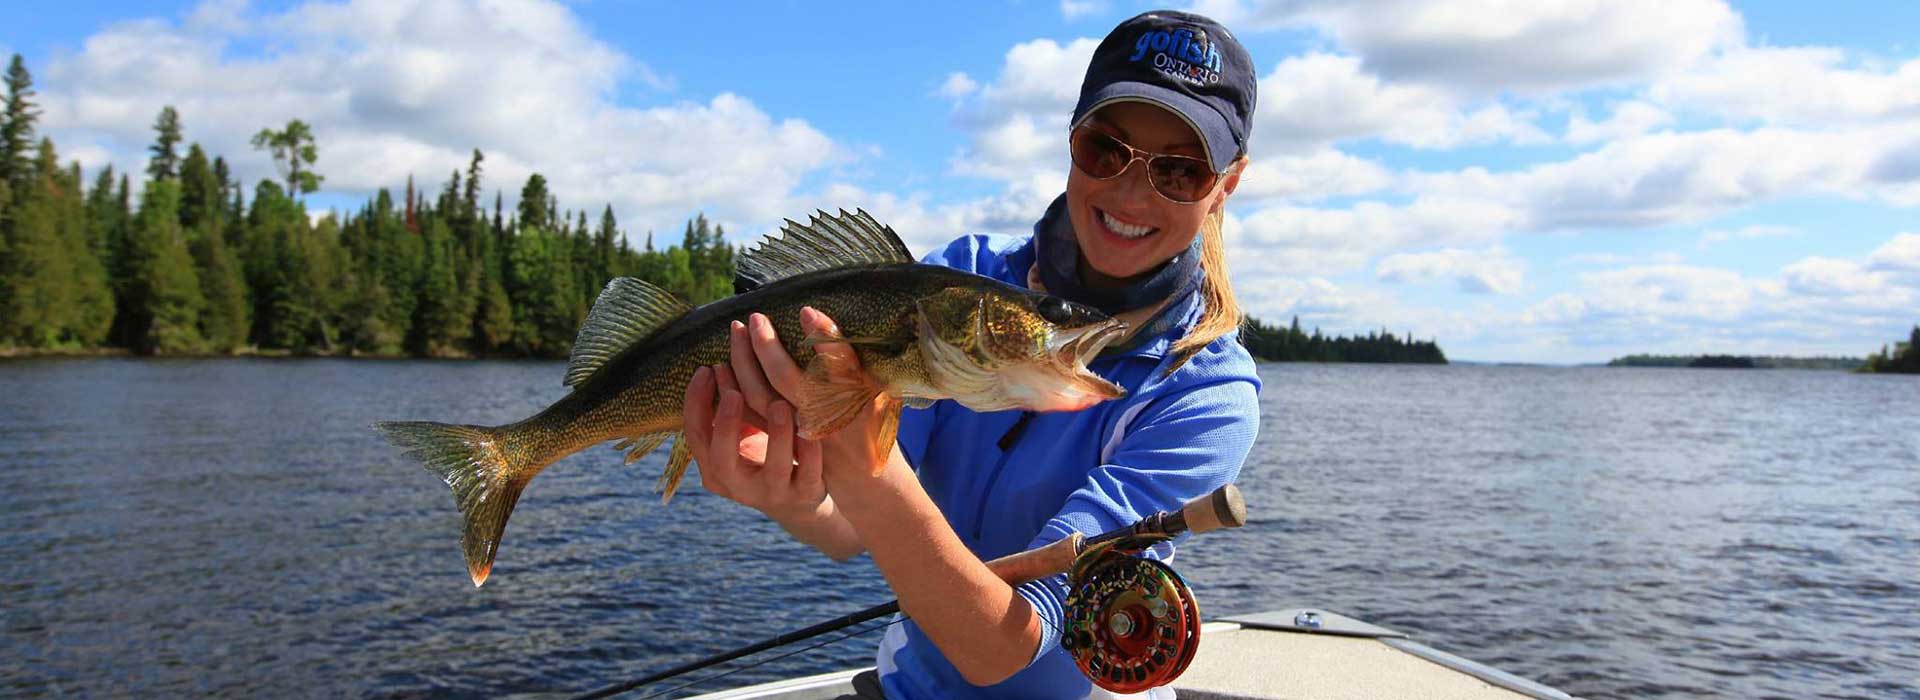 A Novice's Guide to Fly Fishing - Ontario OUT of DOORS